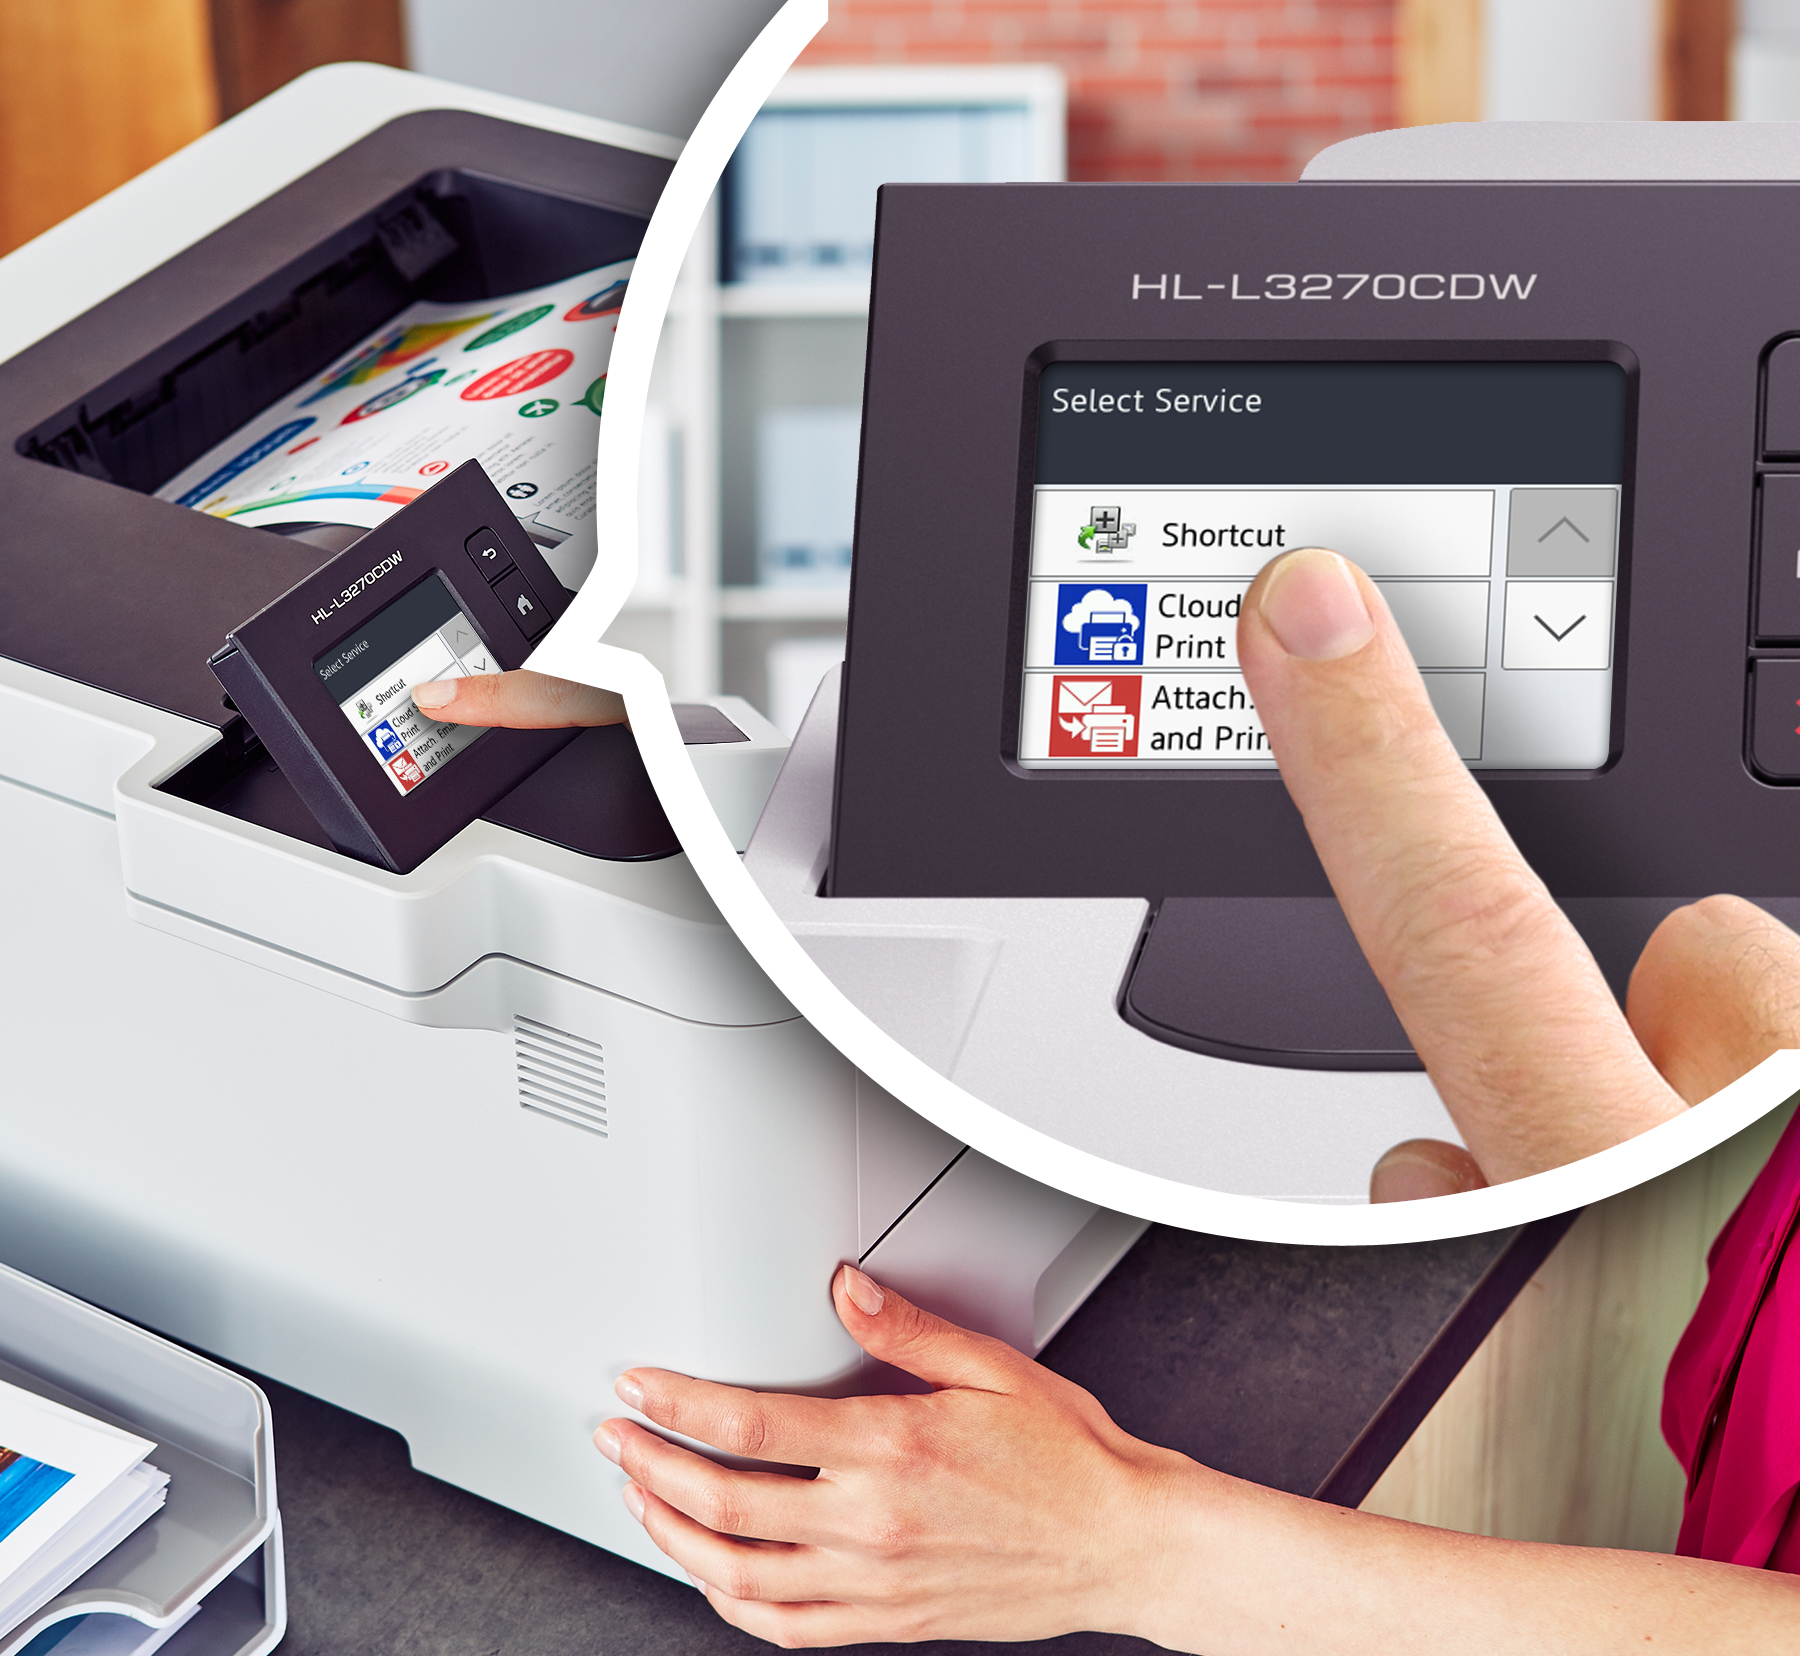 Brother HL-L3270CDW Compact Digital Color Printer Providing Laser Quality Results with NFC, Wireless and Duplex Printing - image 4 of 9